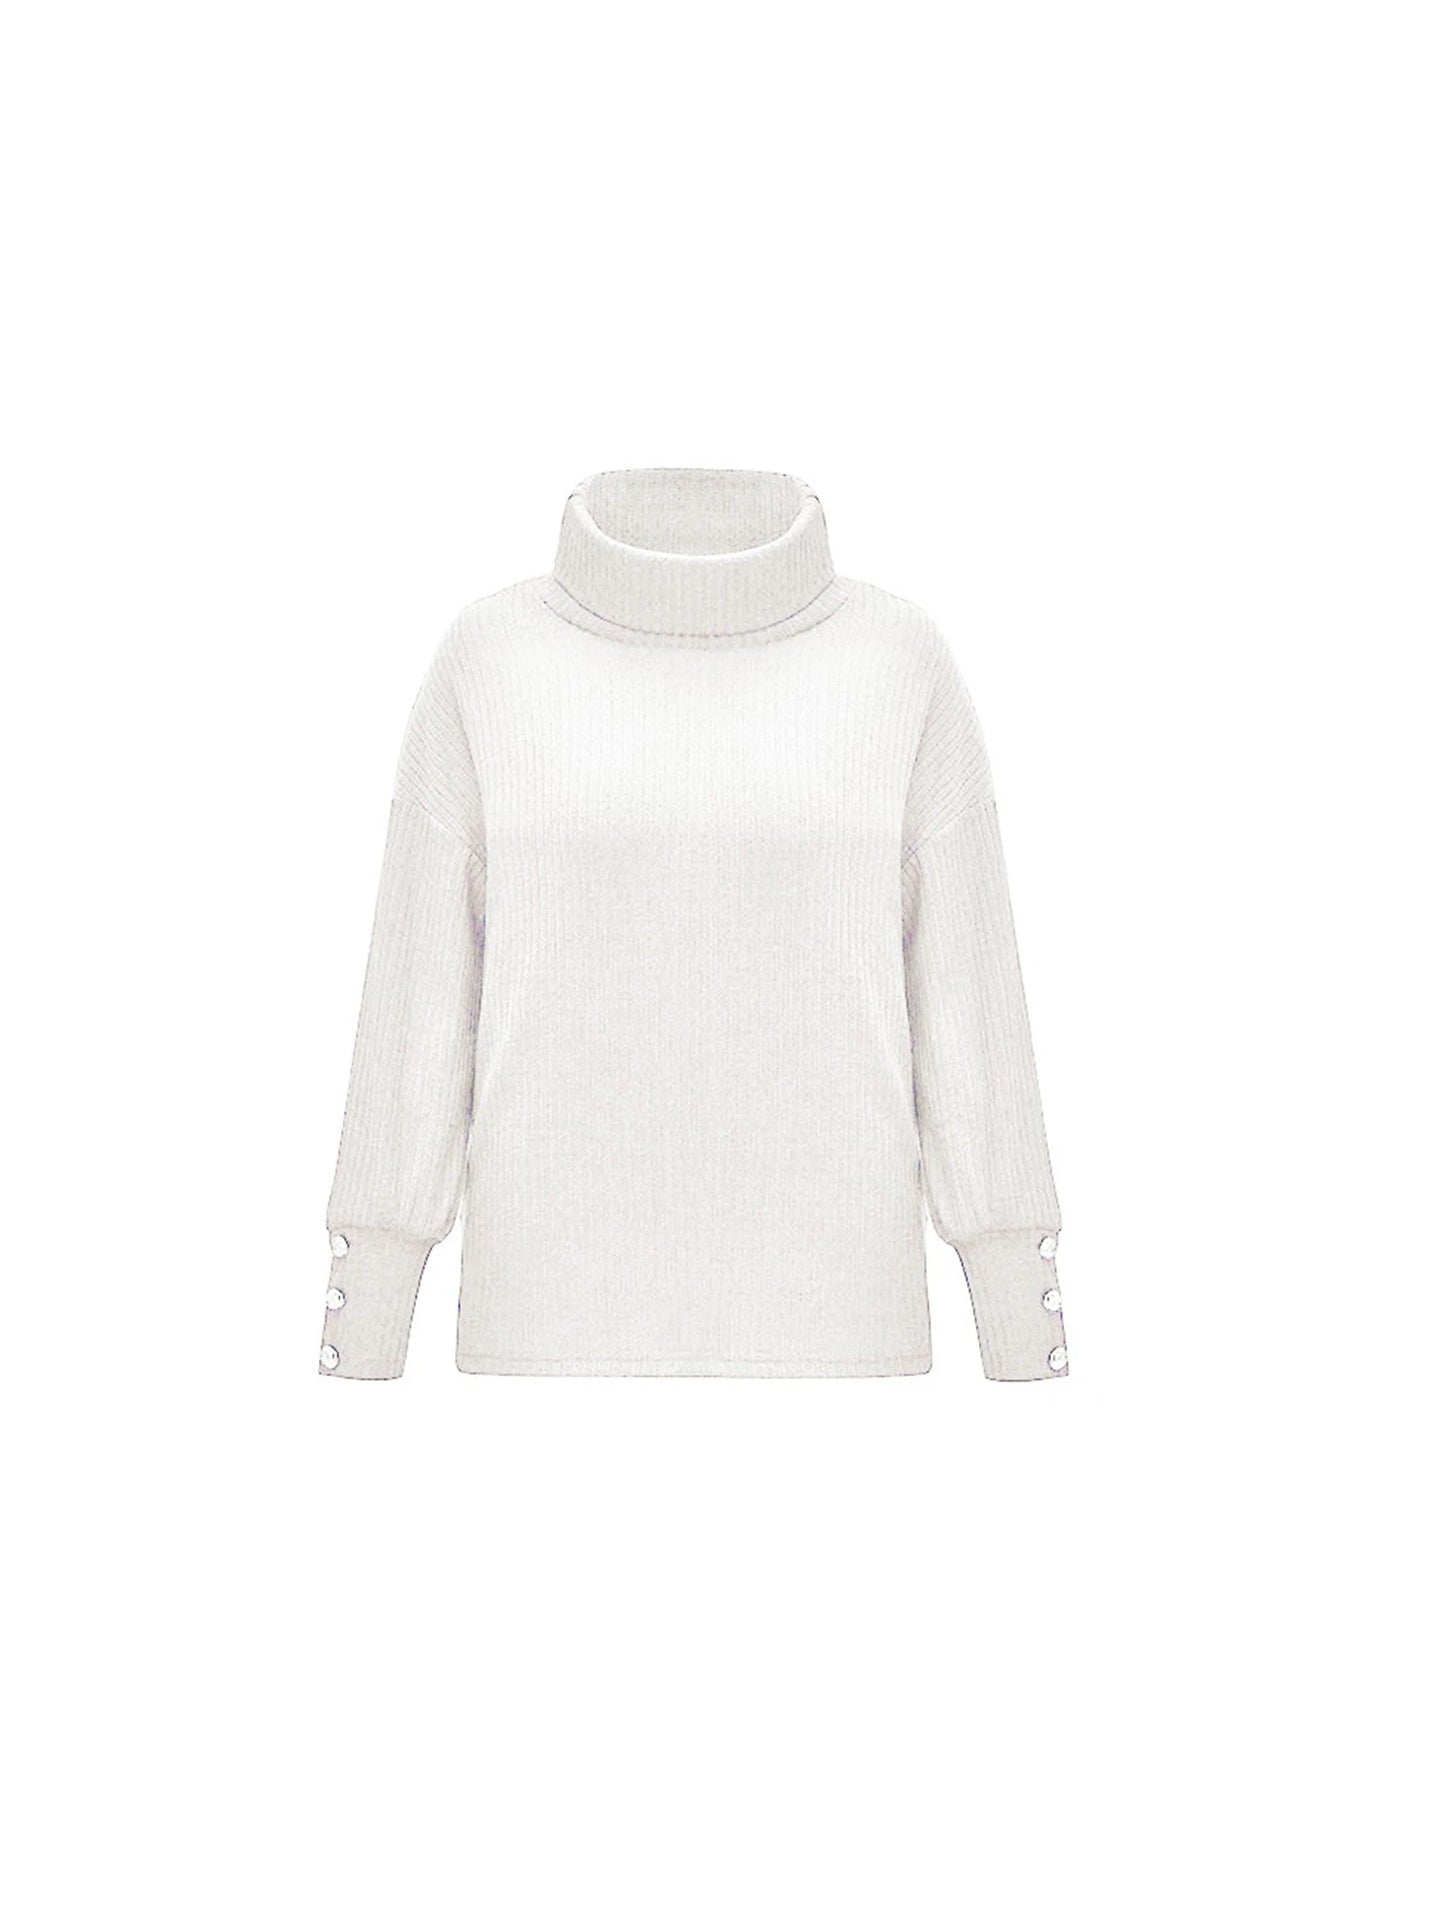 Women's FIGOHR Fashion Casual Long Sleeve Turtleneck Tops Autumn Winter Pullovers Knitted Ladies Loose Tops Knitted Sweater